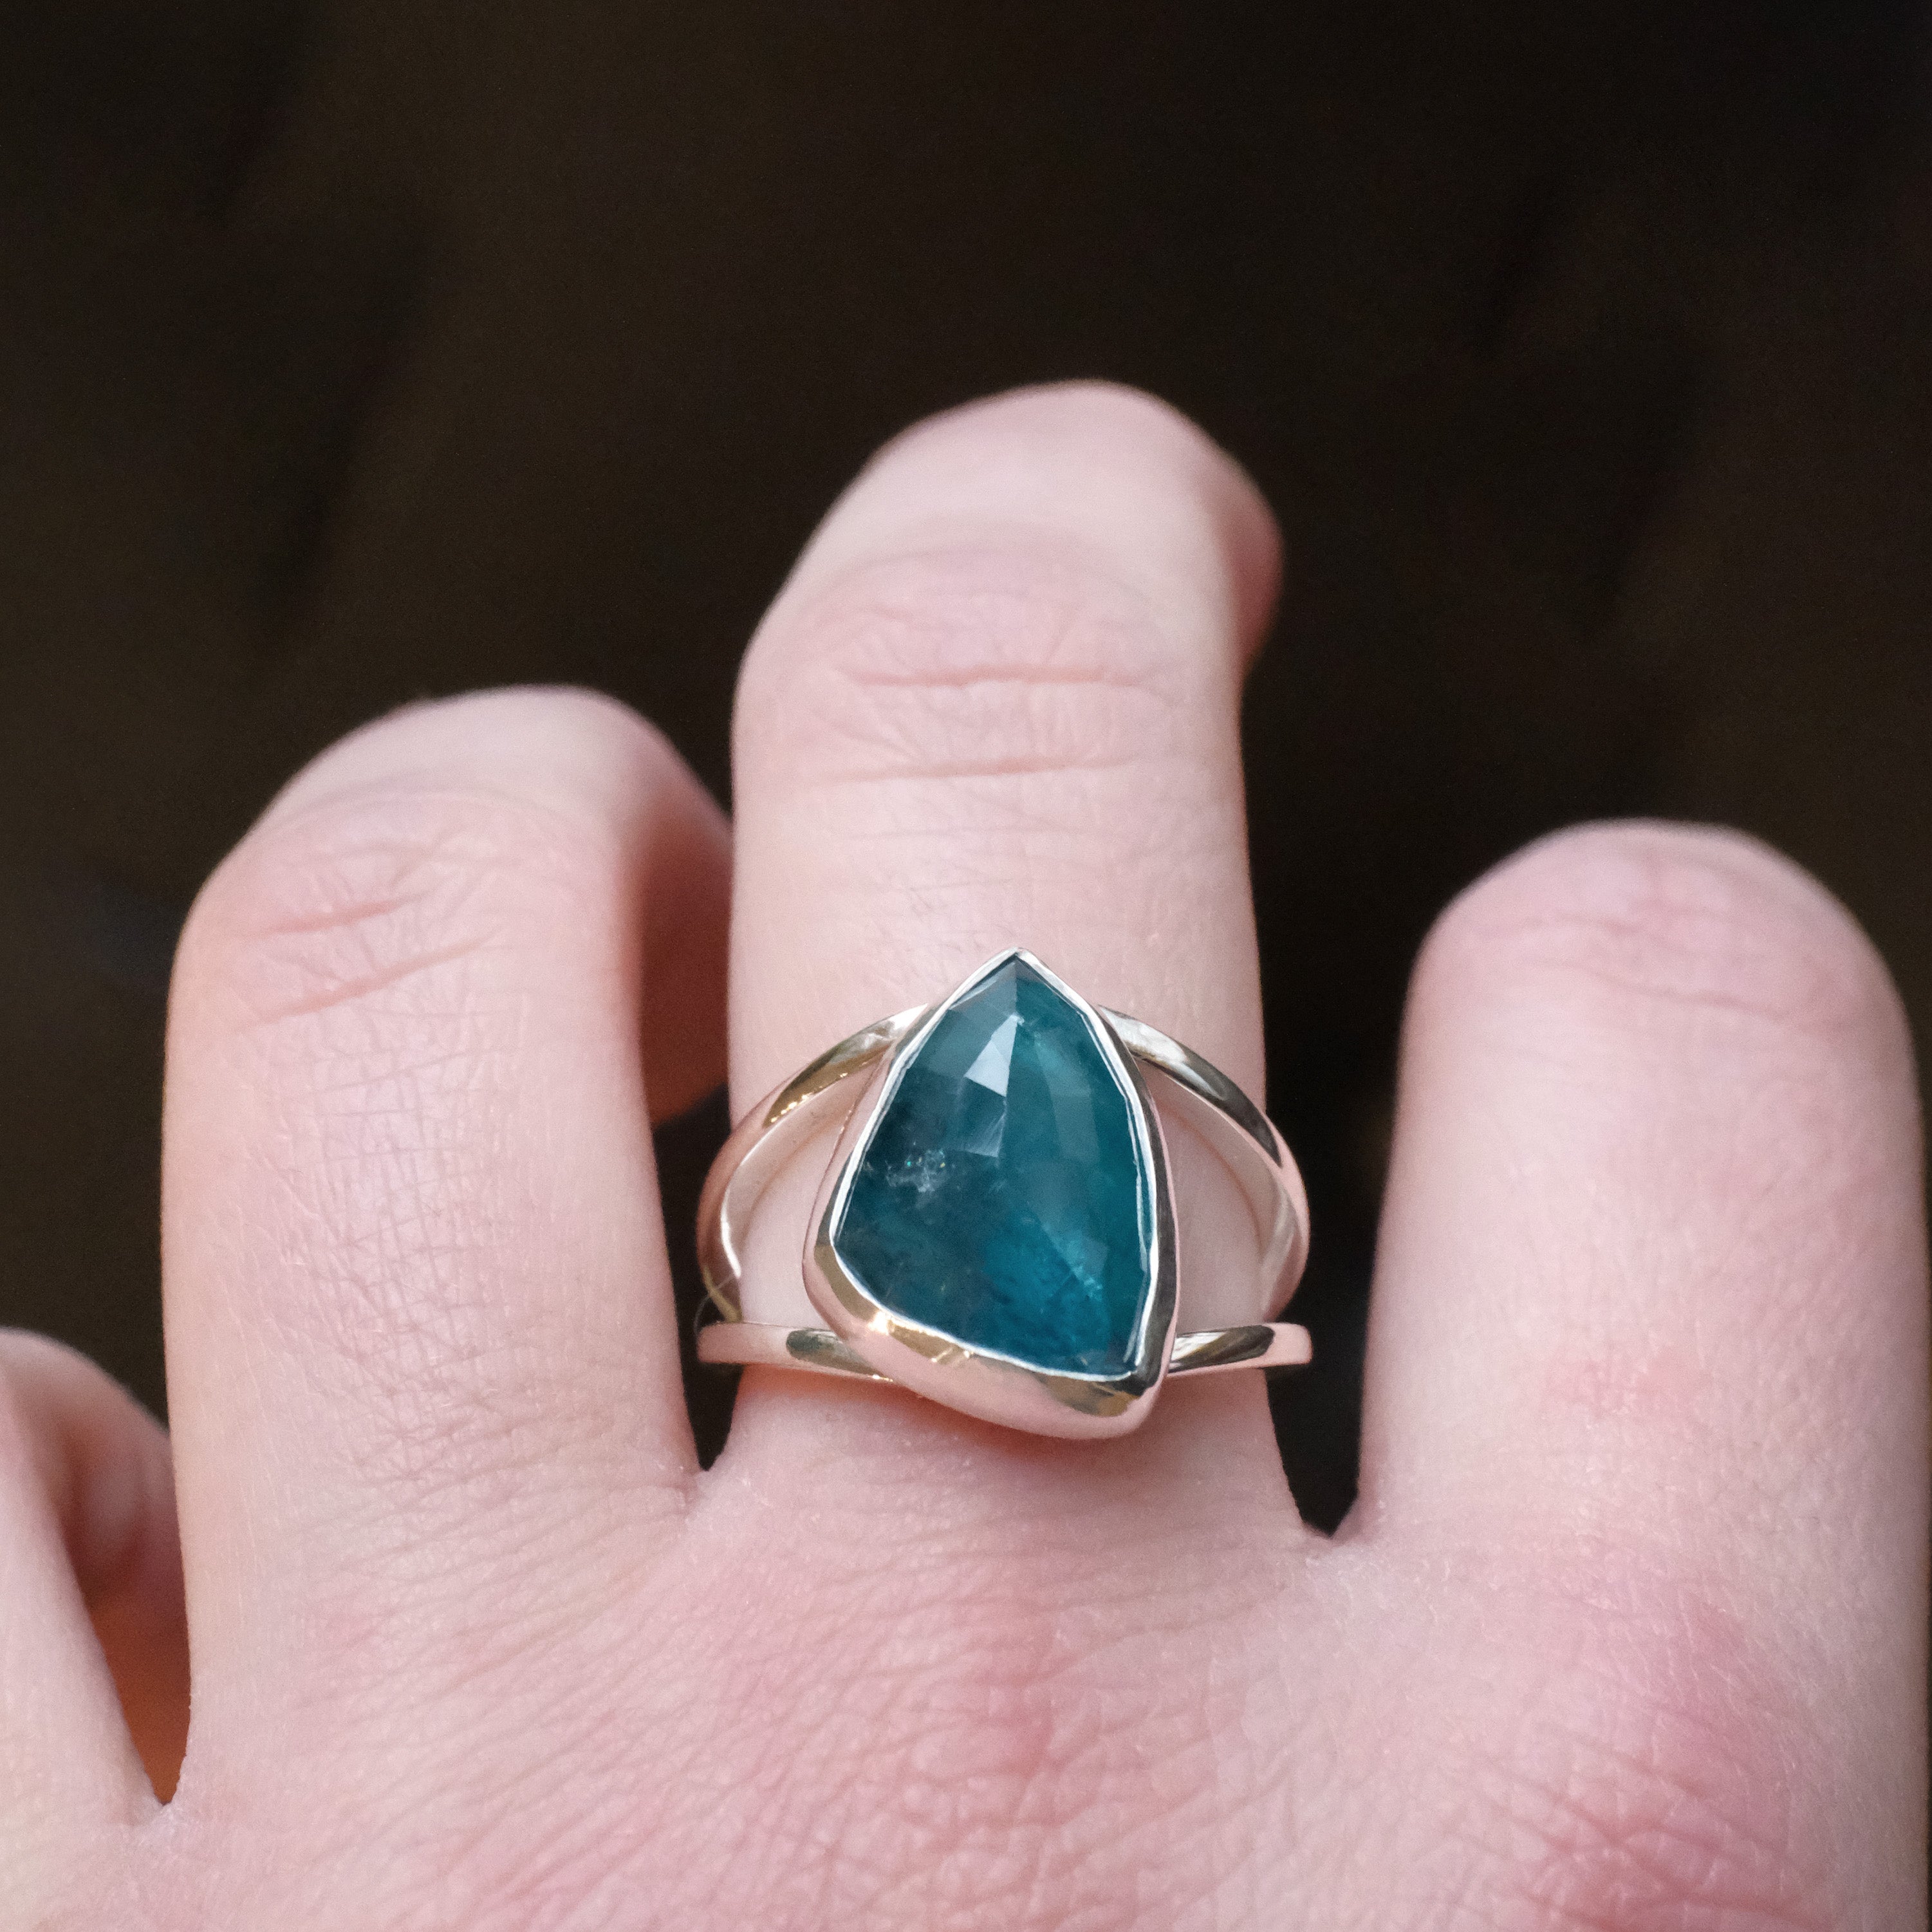 Blue Tourmaline Lucerne Ring (Size 7) - One of a Kind